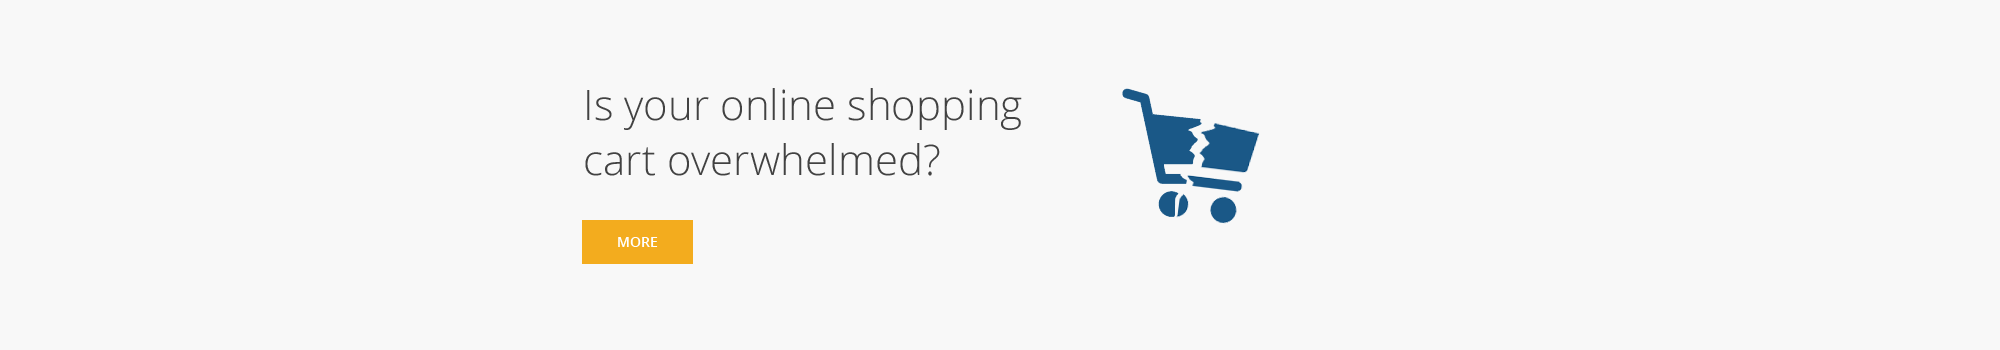 Is your online shopping cart overwhelmed?